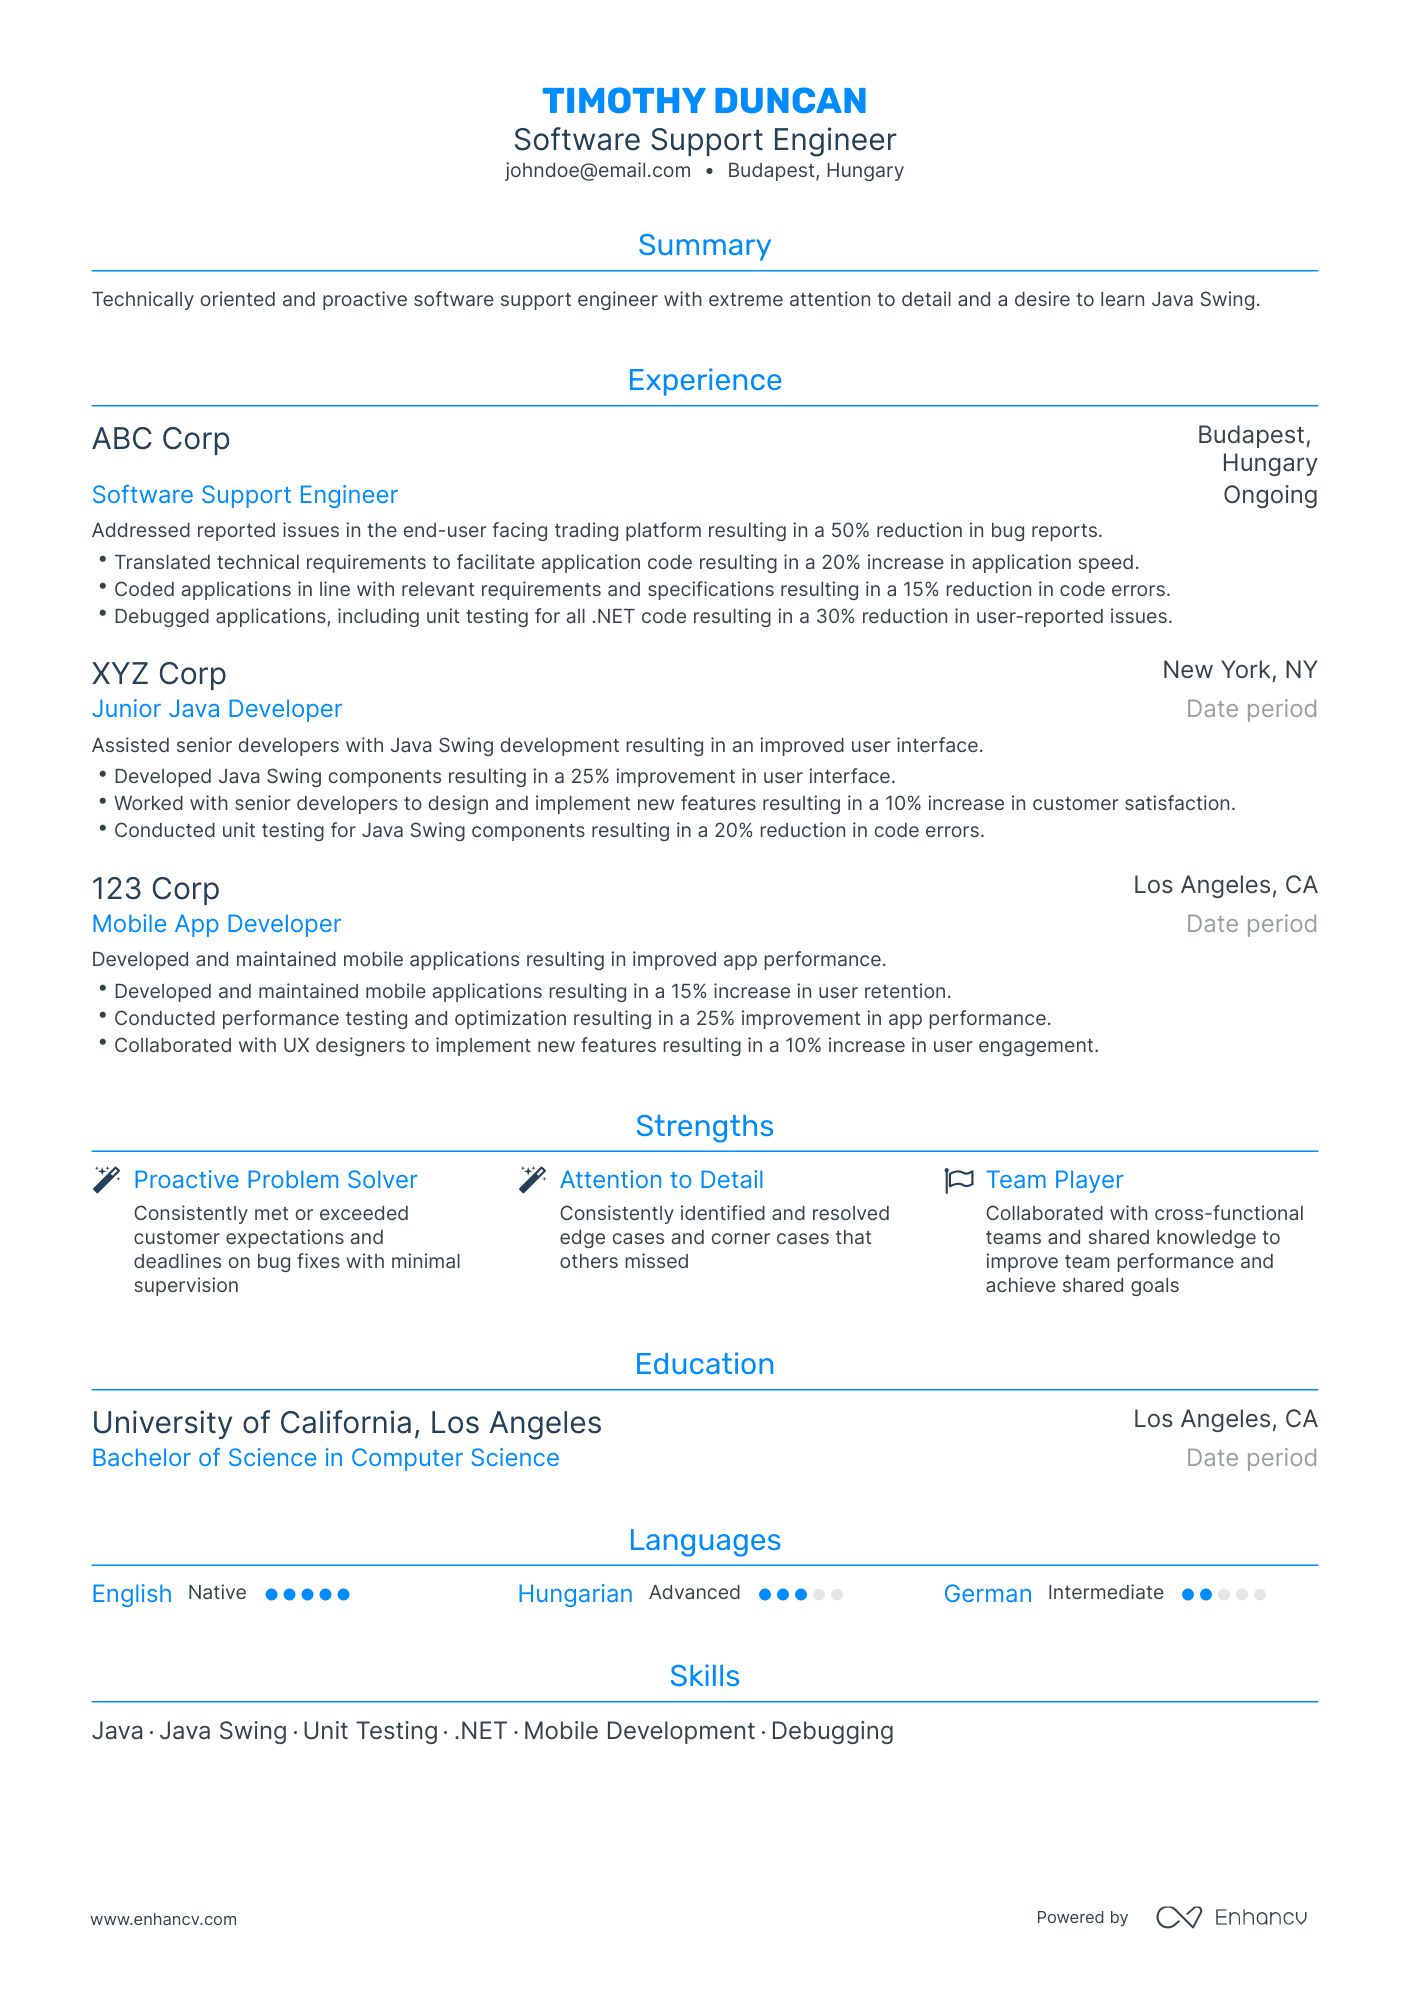 Traditional Software Support Engineer Resume Template